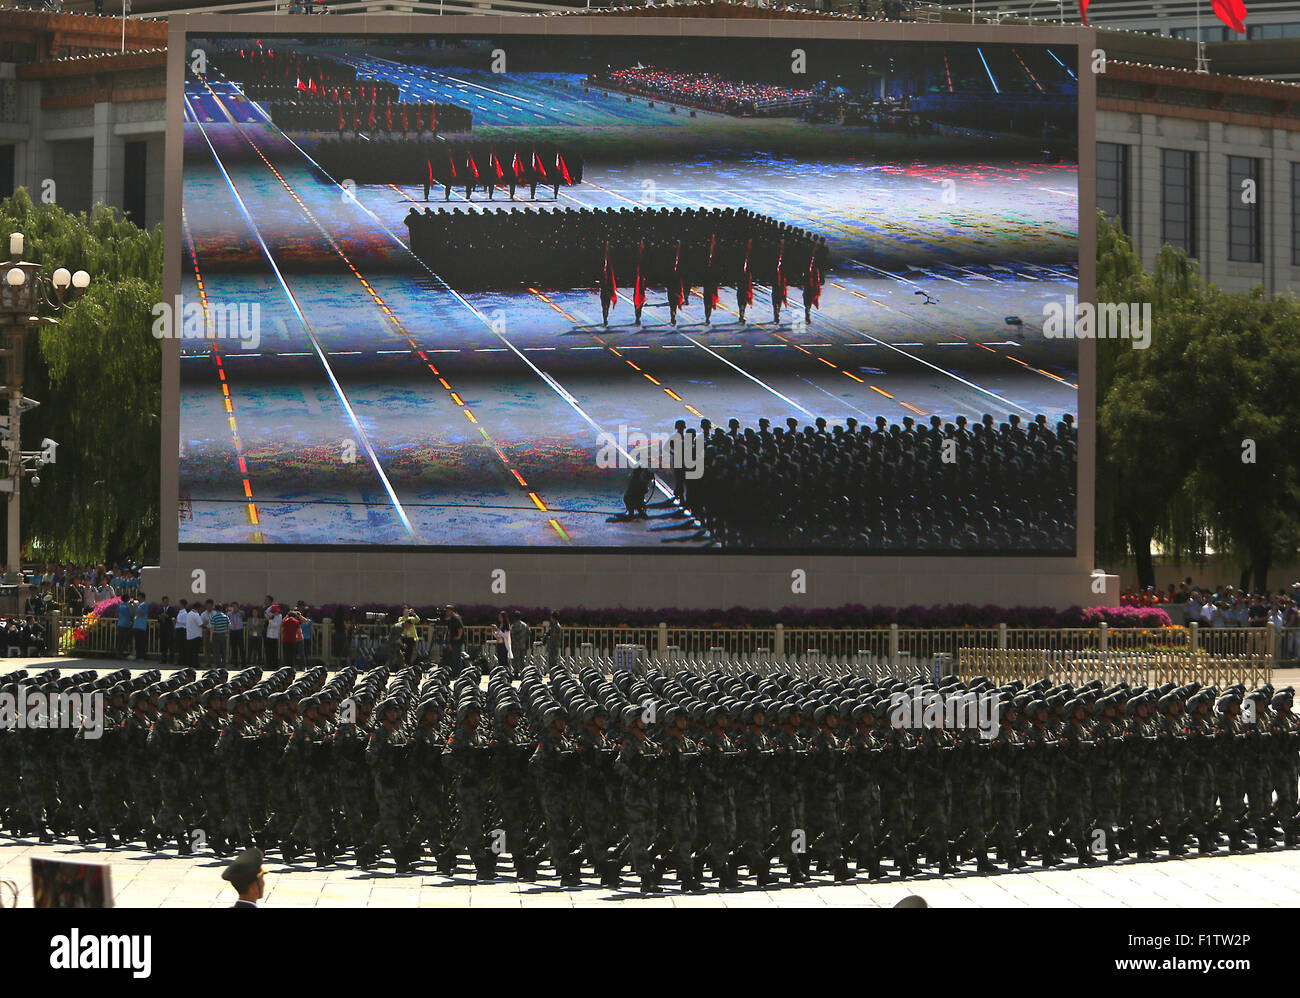 Sept. 3, 2015 - Beijing, CHINA - Over 12,000 soldiers and hundreds of tanks, ballistic missile launchers, amphibious assault vehicles, drones, fighter jets, helicopters and other military equipment participate in a massive parade marking the 70th anniversary of victory over Japan and the end of World War II in Beijing on September 3, 2015. Presiding over the extravaganza, President Xi Jinping, China's most powerful leader in decades, said that China would remain committed to ''the path of peaceful development'' and unexpectedly vowed to cut 300,000 troops from its 2.3-million strong military, Stock Photo